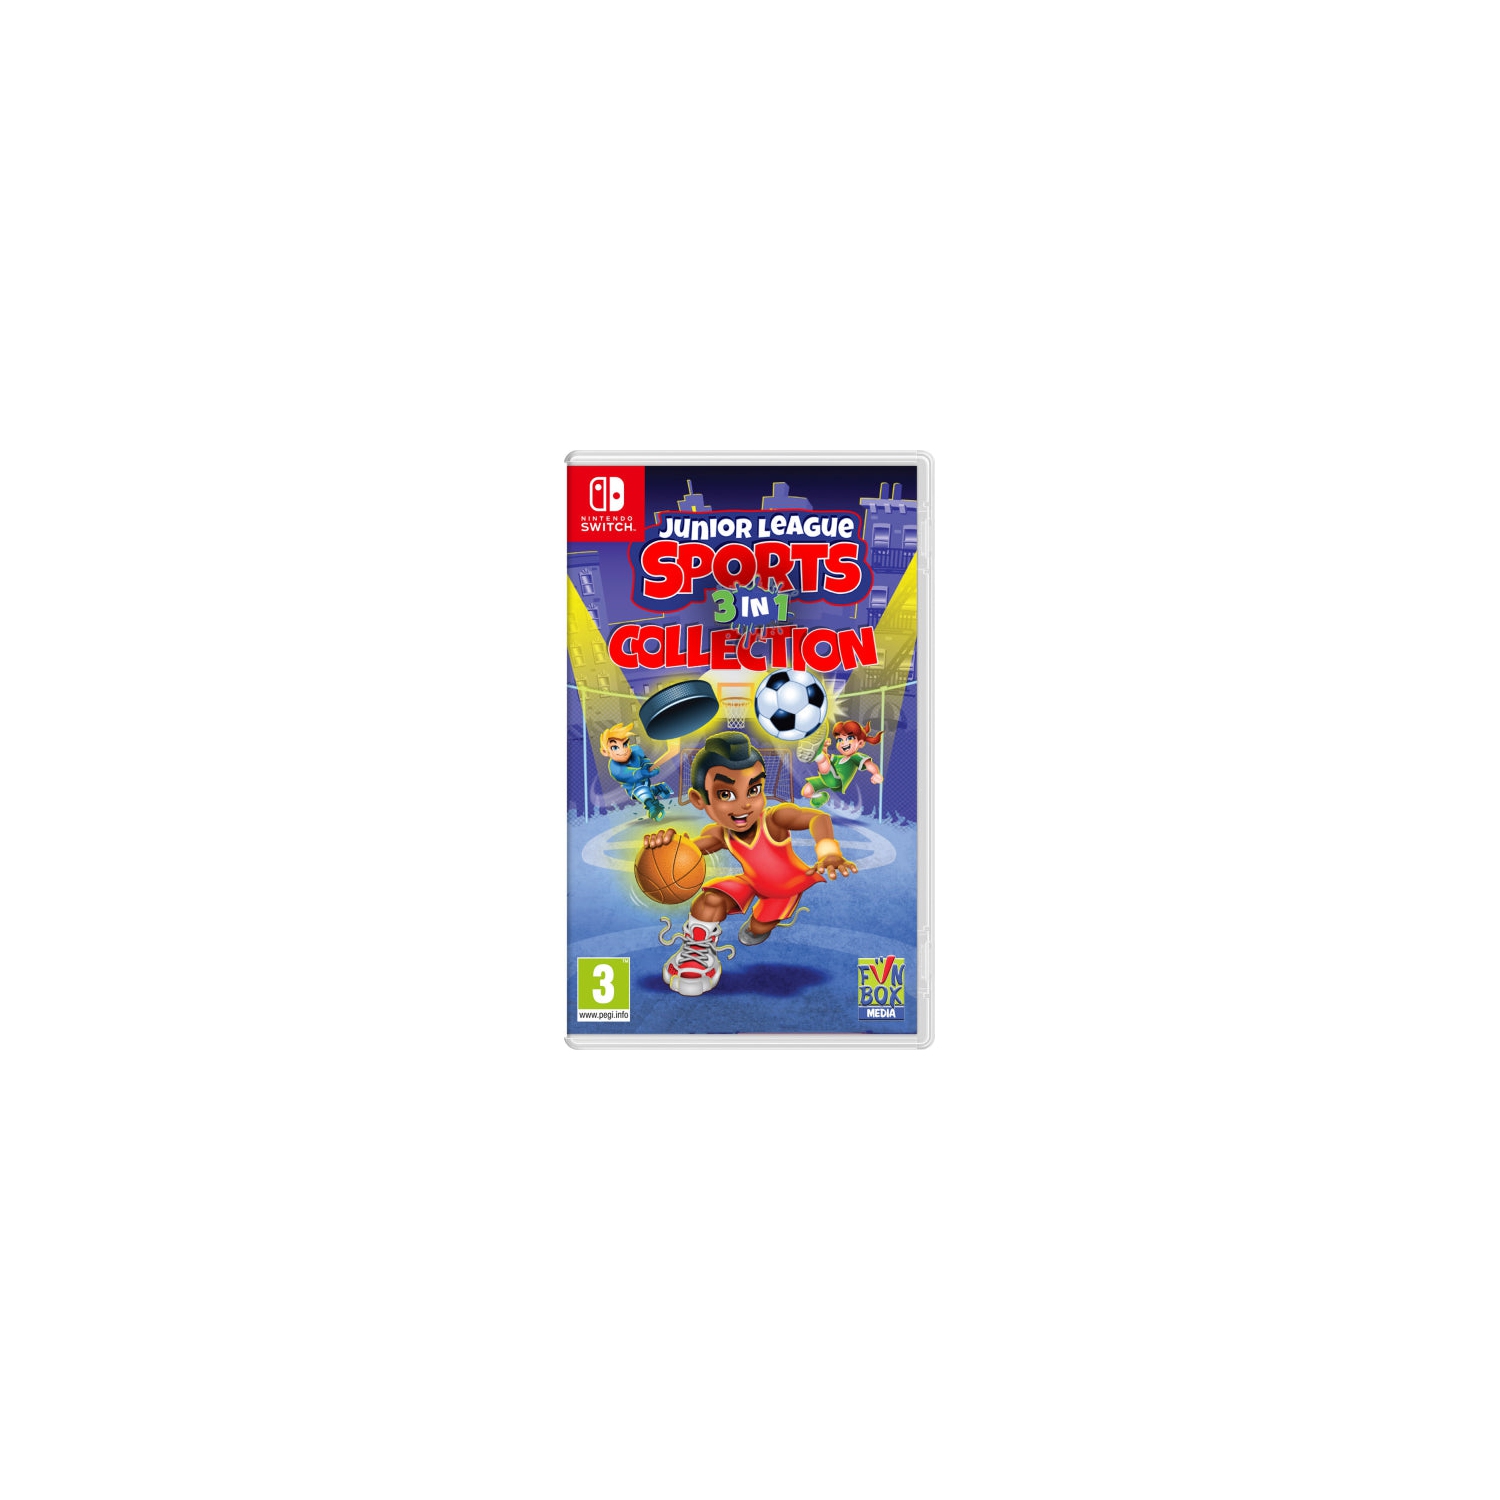 Junior League Sports 3-in-1 Collection [Nintendo Switch]